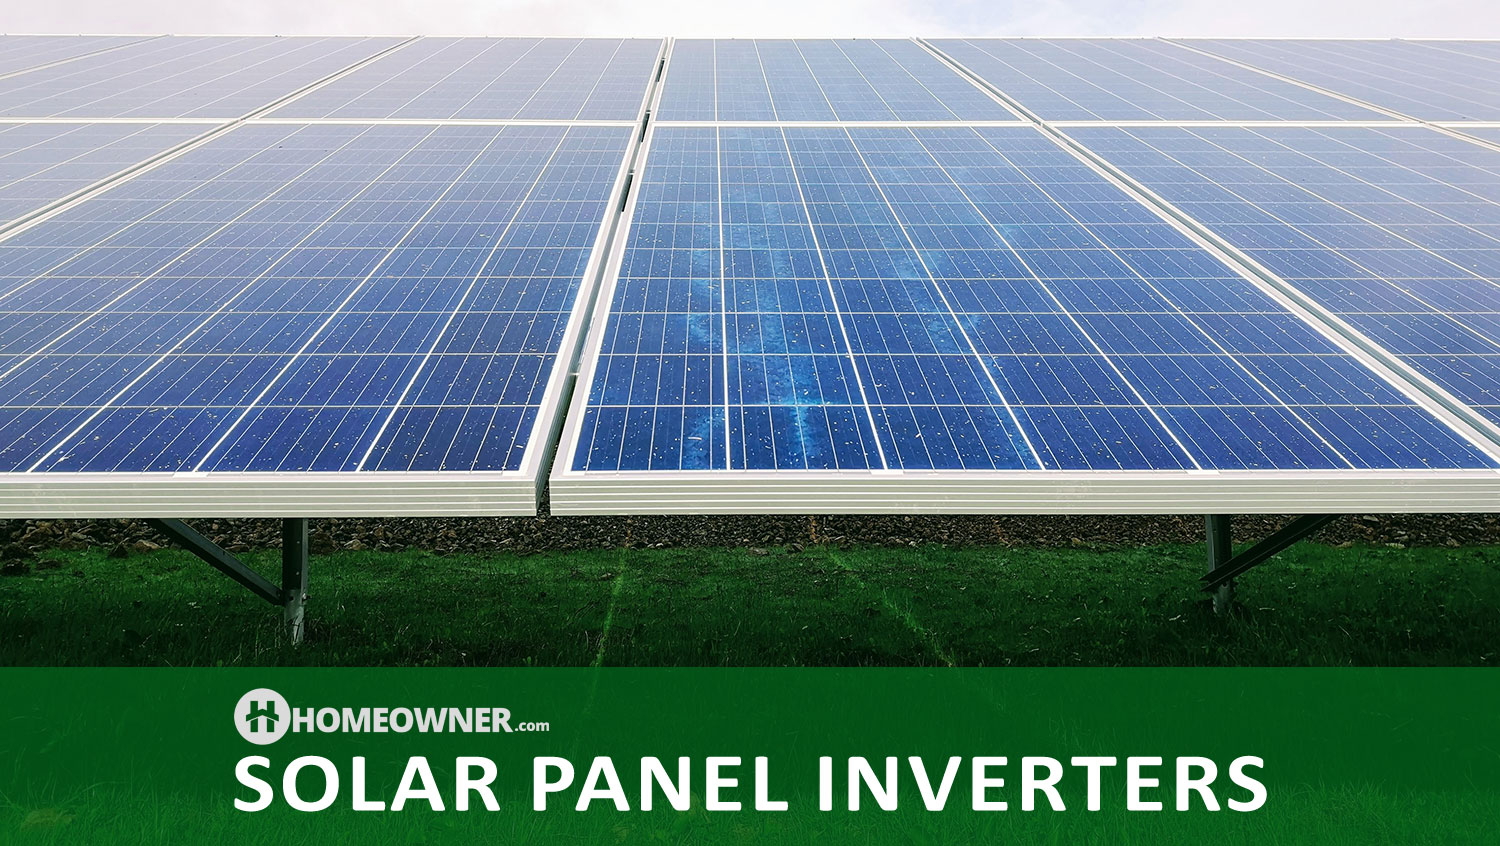 What Are Solar Panel Inverters?